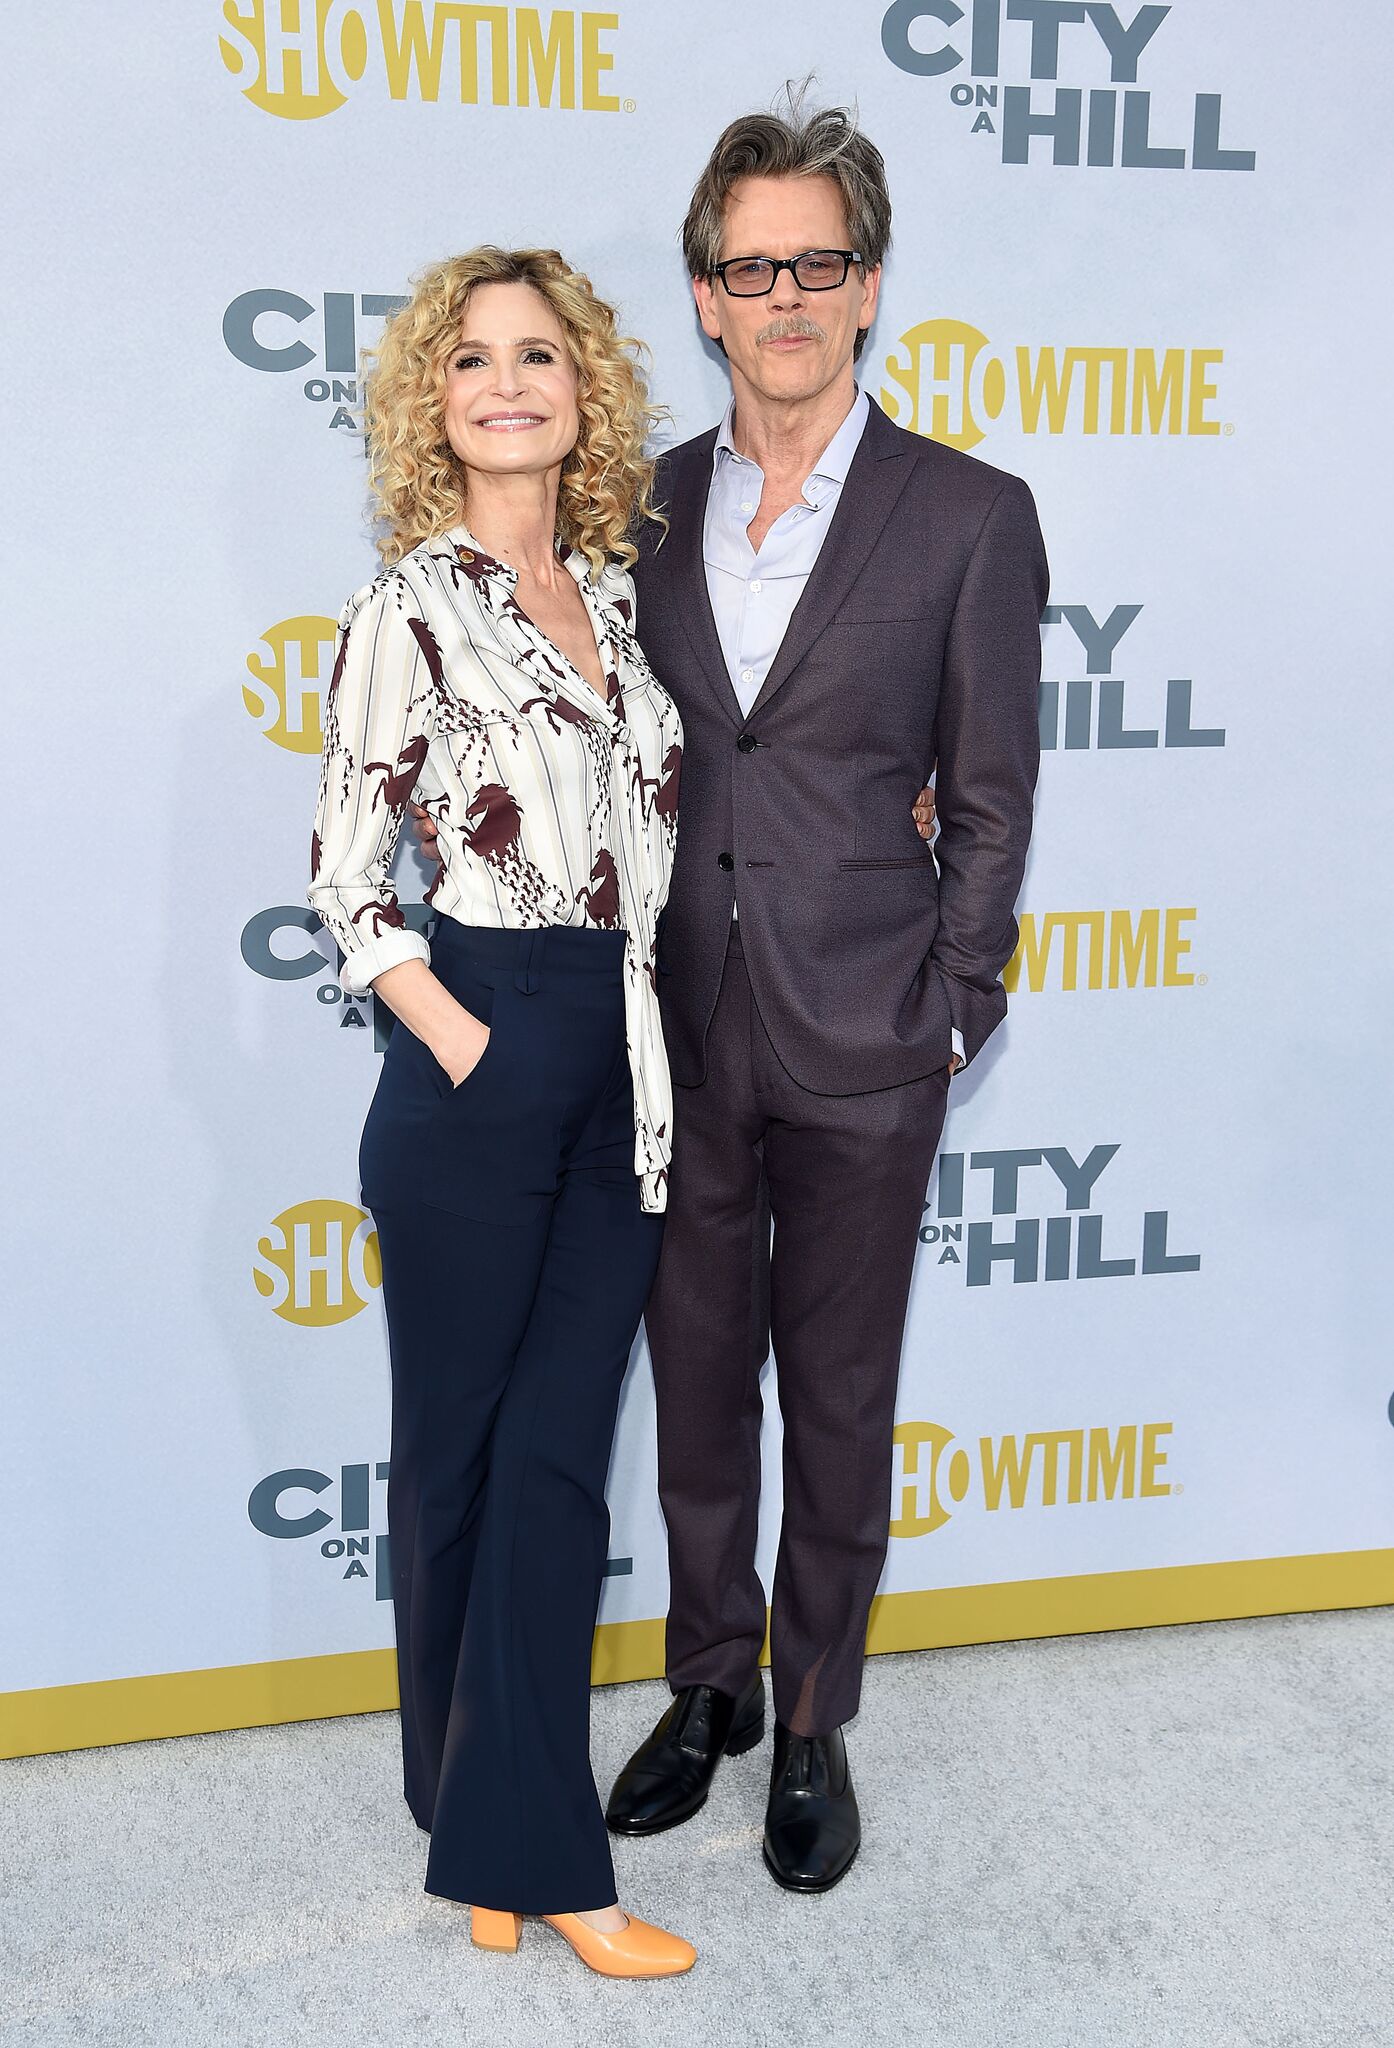 Kyra Sedgwick and Kevin Bacon attend Showtime's "City On A Hill"  Premiere | Getty Images